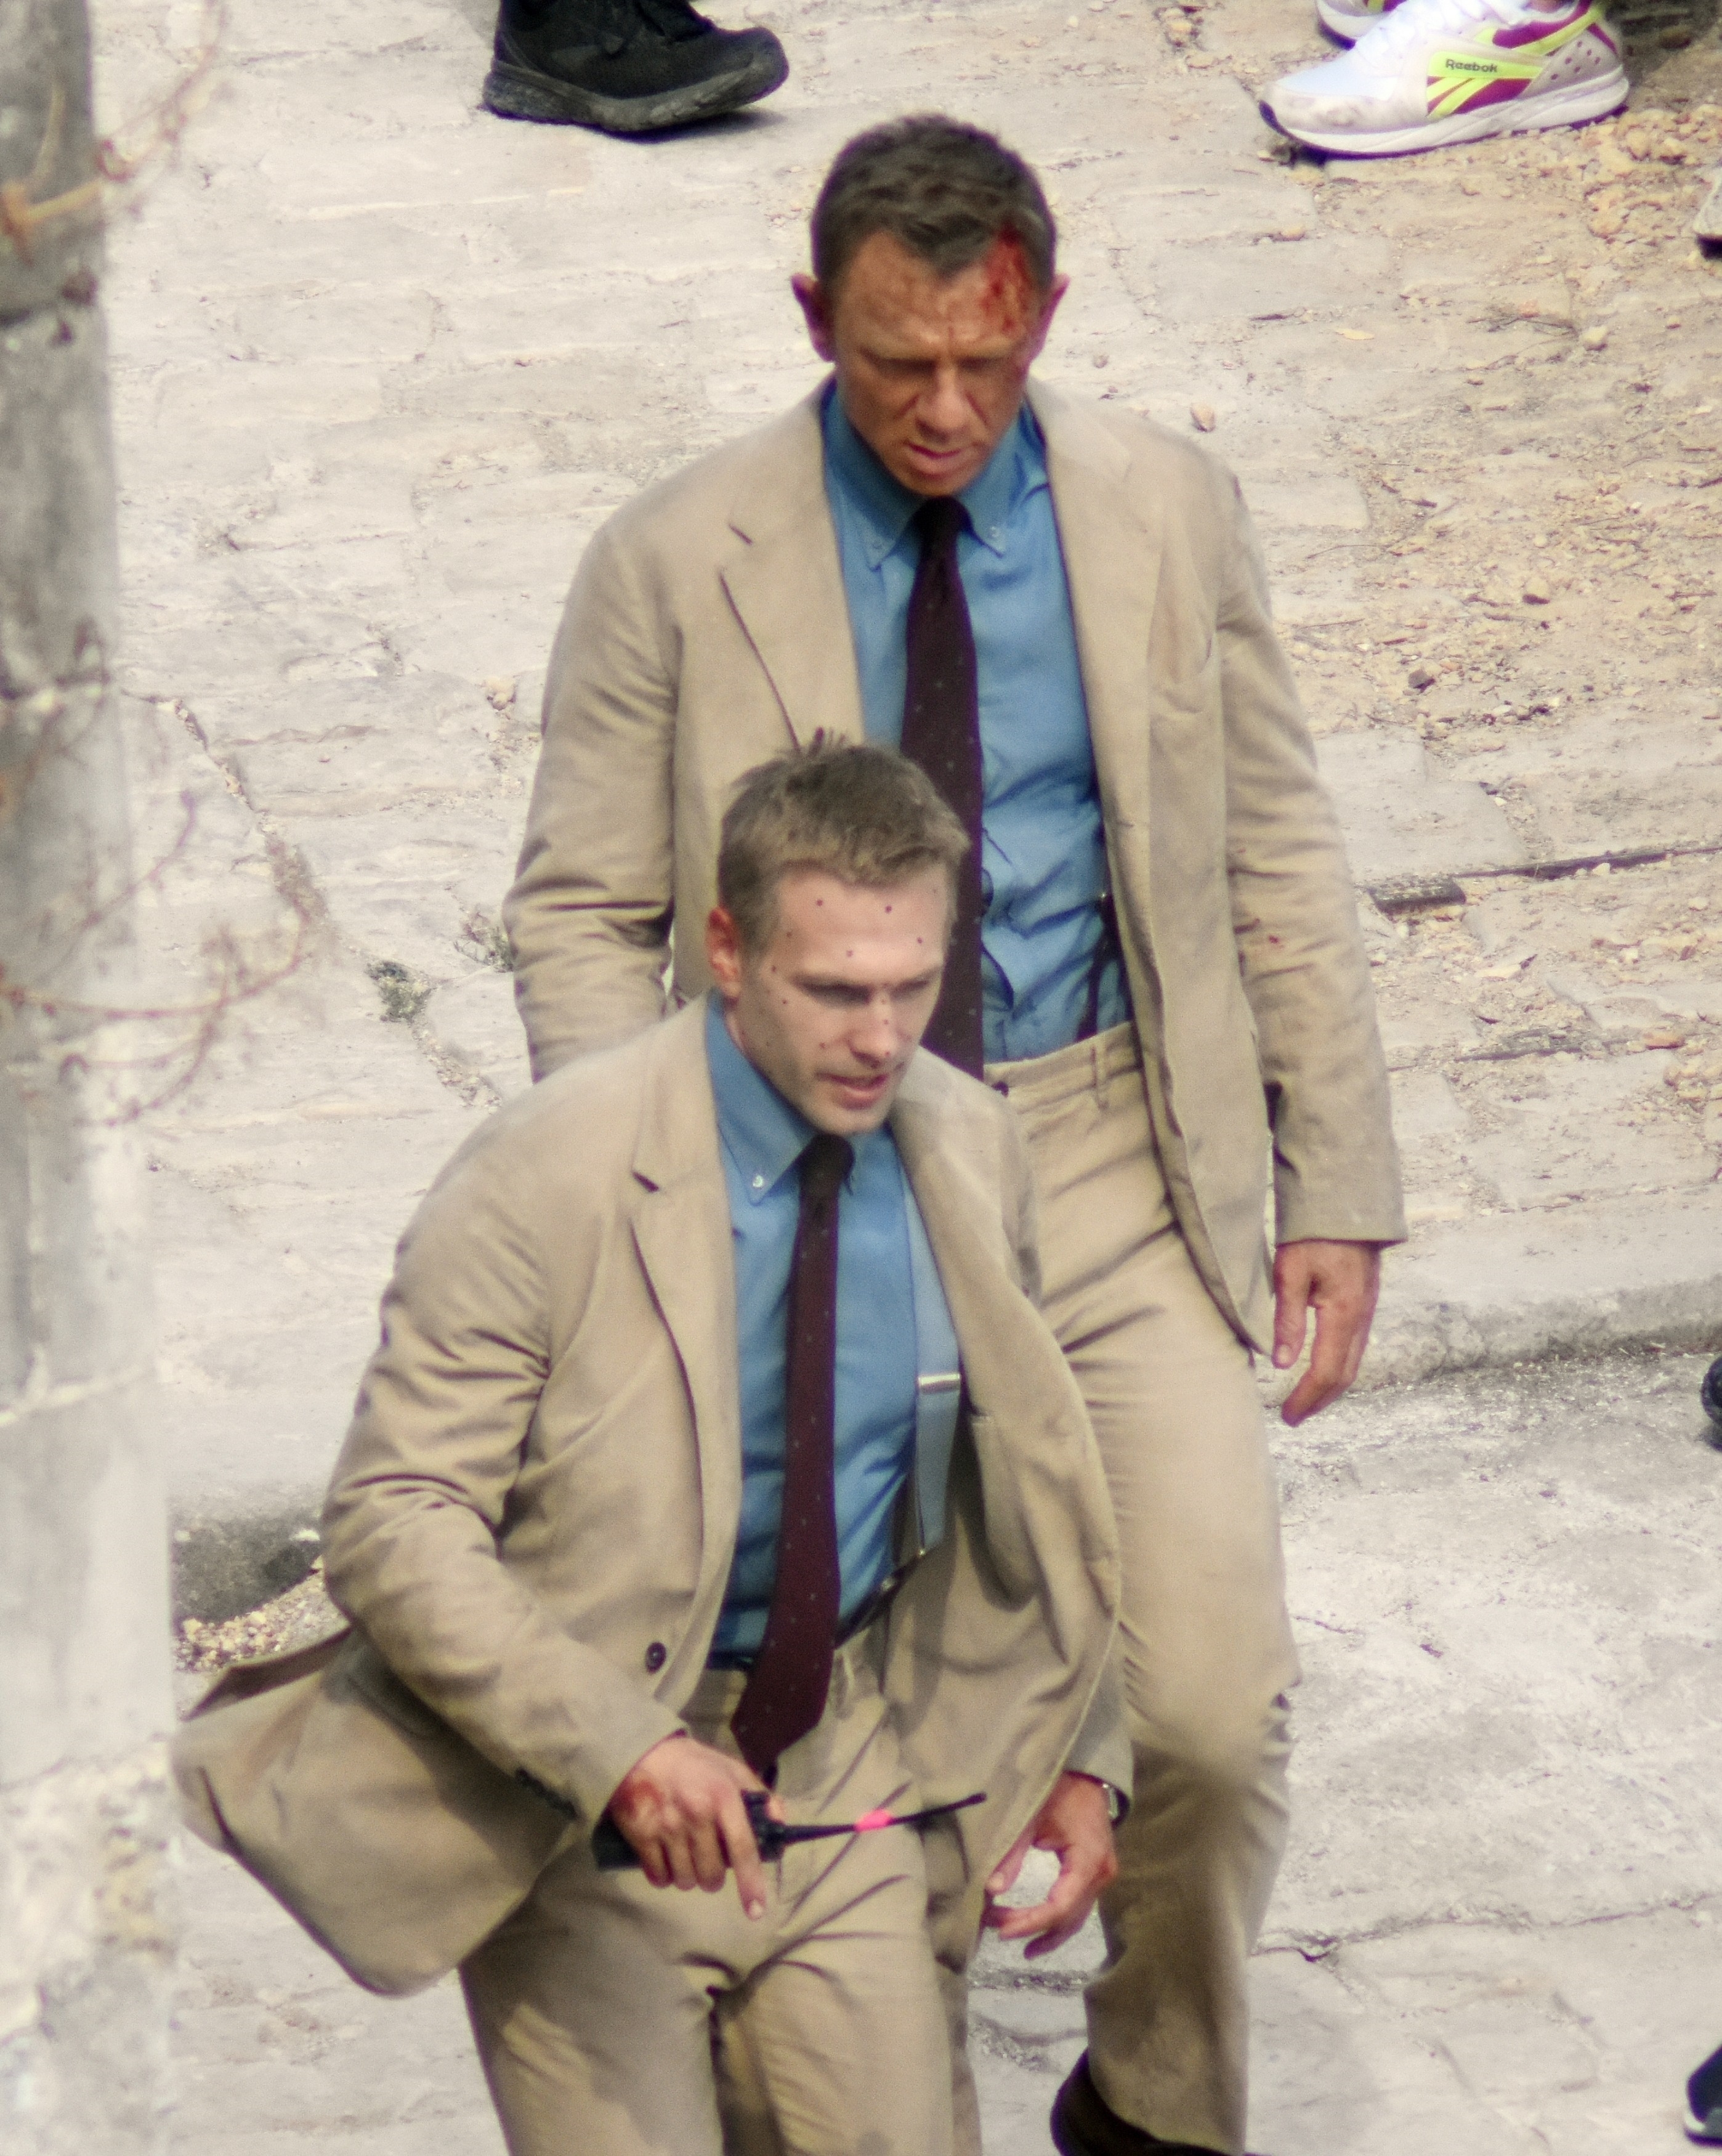 Daniel Craig and Jean-Charles Rousseau in distressed beige suits and blue ties on a film set